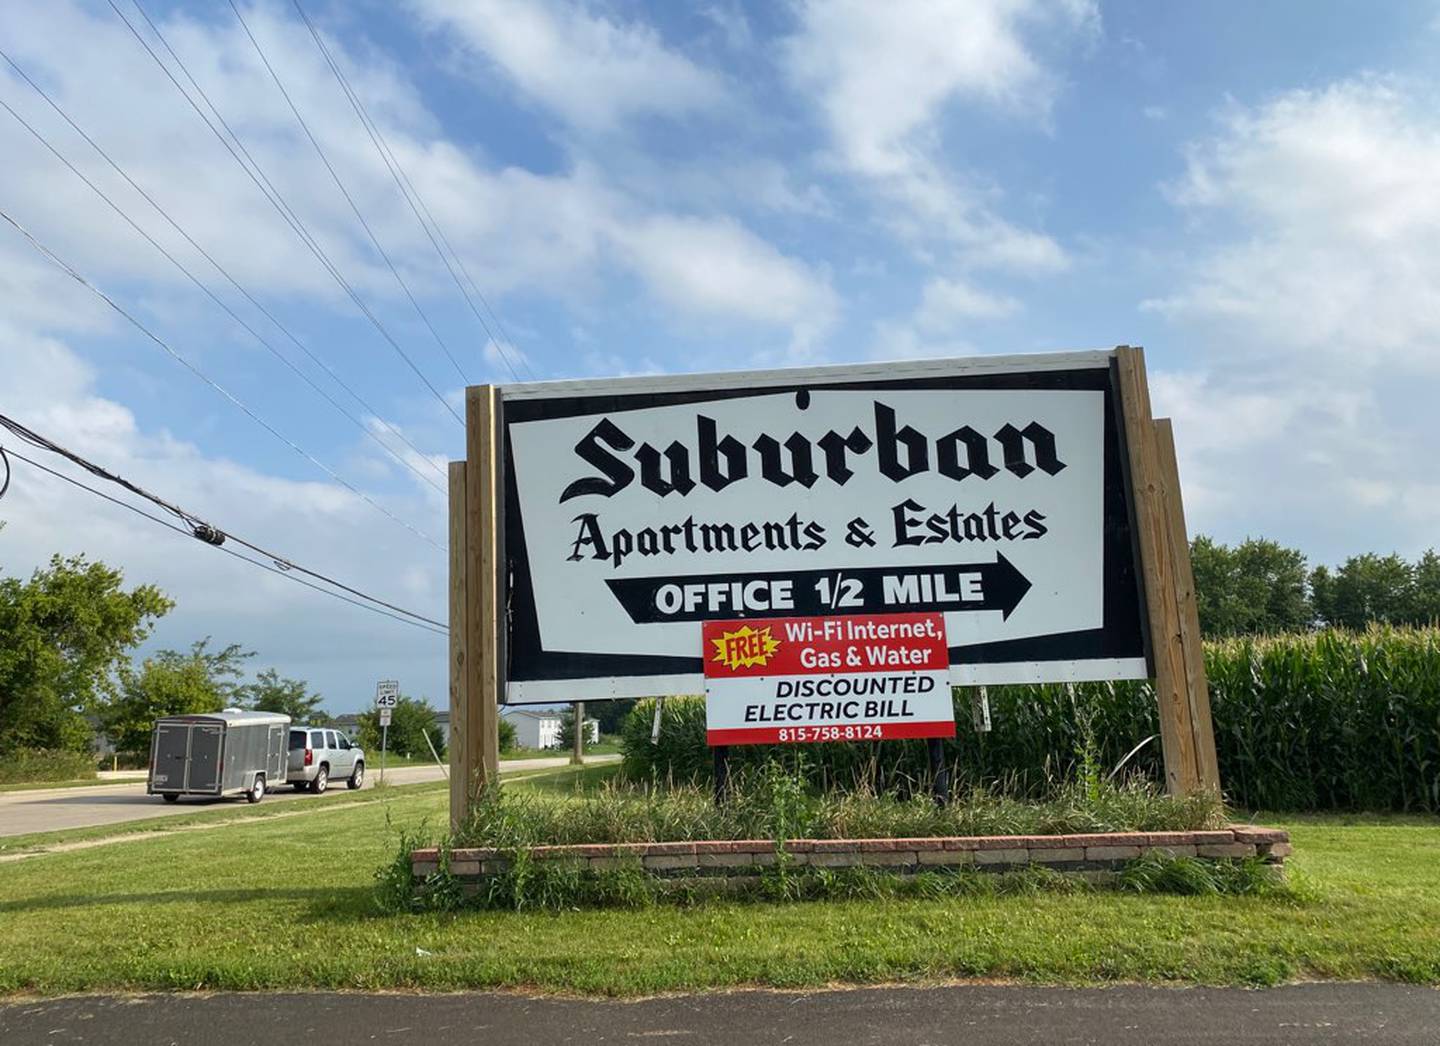 Chicago-based developer Clear Investment Group LLC has offered $30 million to purchase privately-owned rental communities Suburban Estates and Suburban Apartments on North Annie Glidden and Twombly Roads in unincorporated DeKalb County. The 80-acre site would be annexed into the city of DeKalb under a new proposed governmental agreement with the city, DeKalb County government and Clear Investment, according to city documents released Thursday, Aug, 4, 2022.